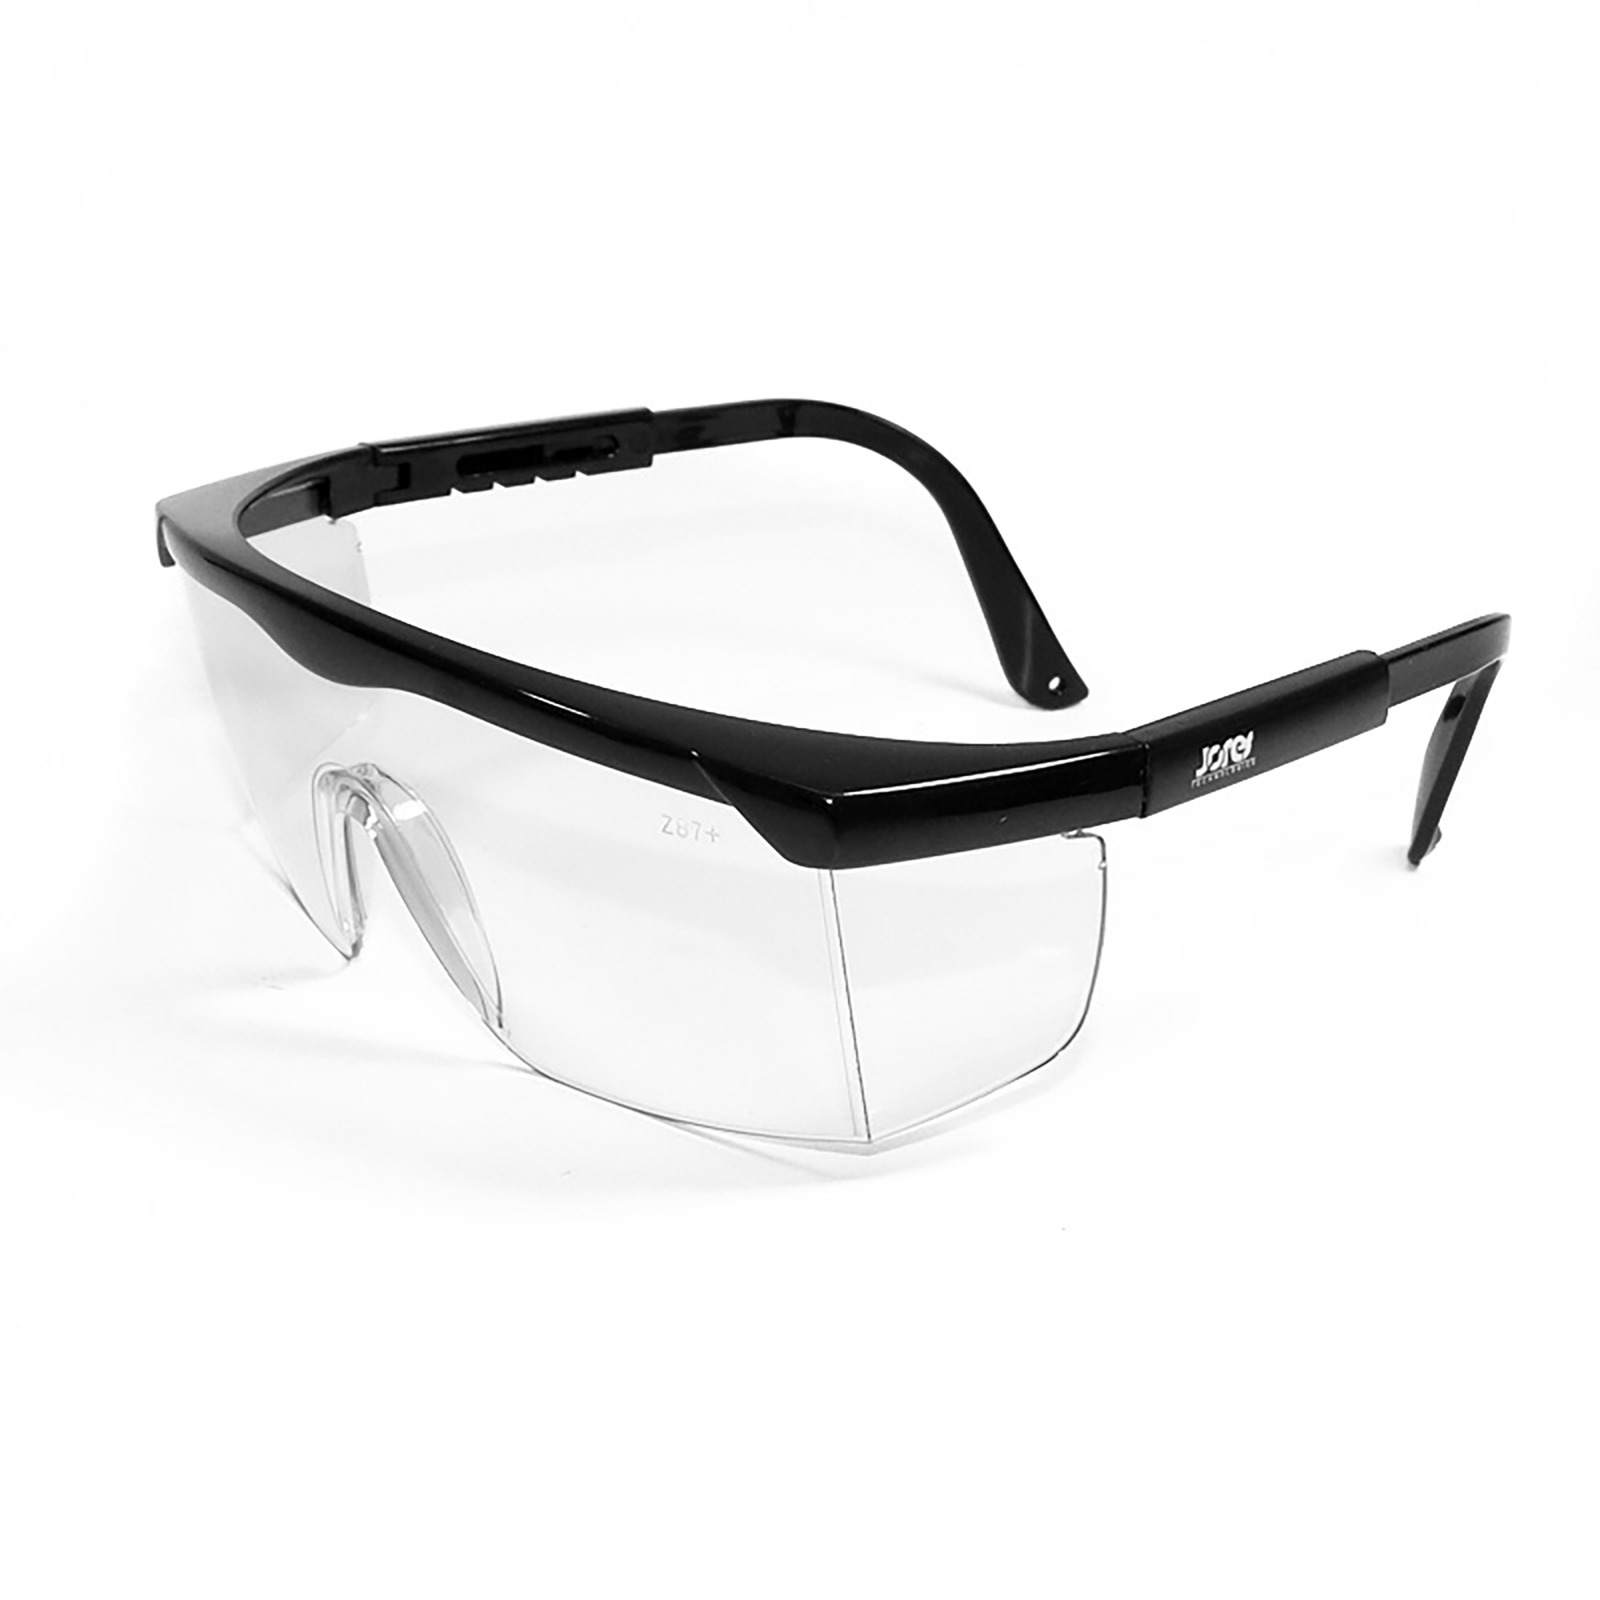 diagonal view of the black framed rectangular safety clear glasses with side shields for high impact protection with adjustable temple legs